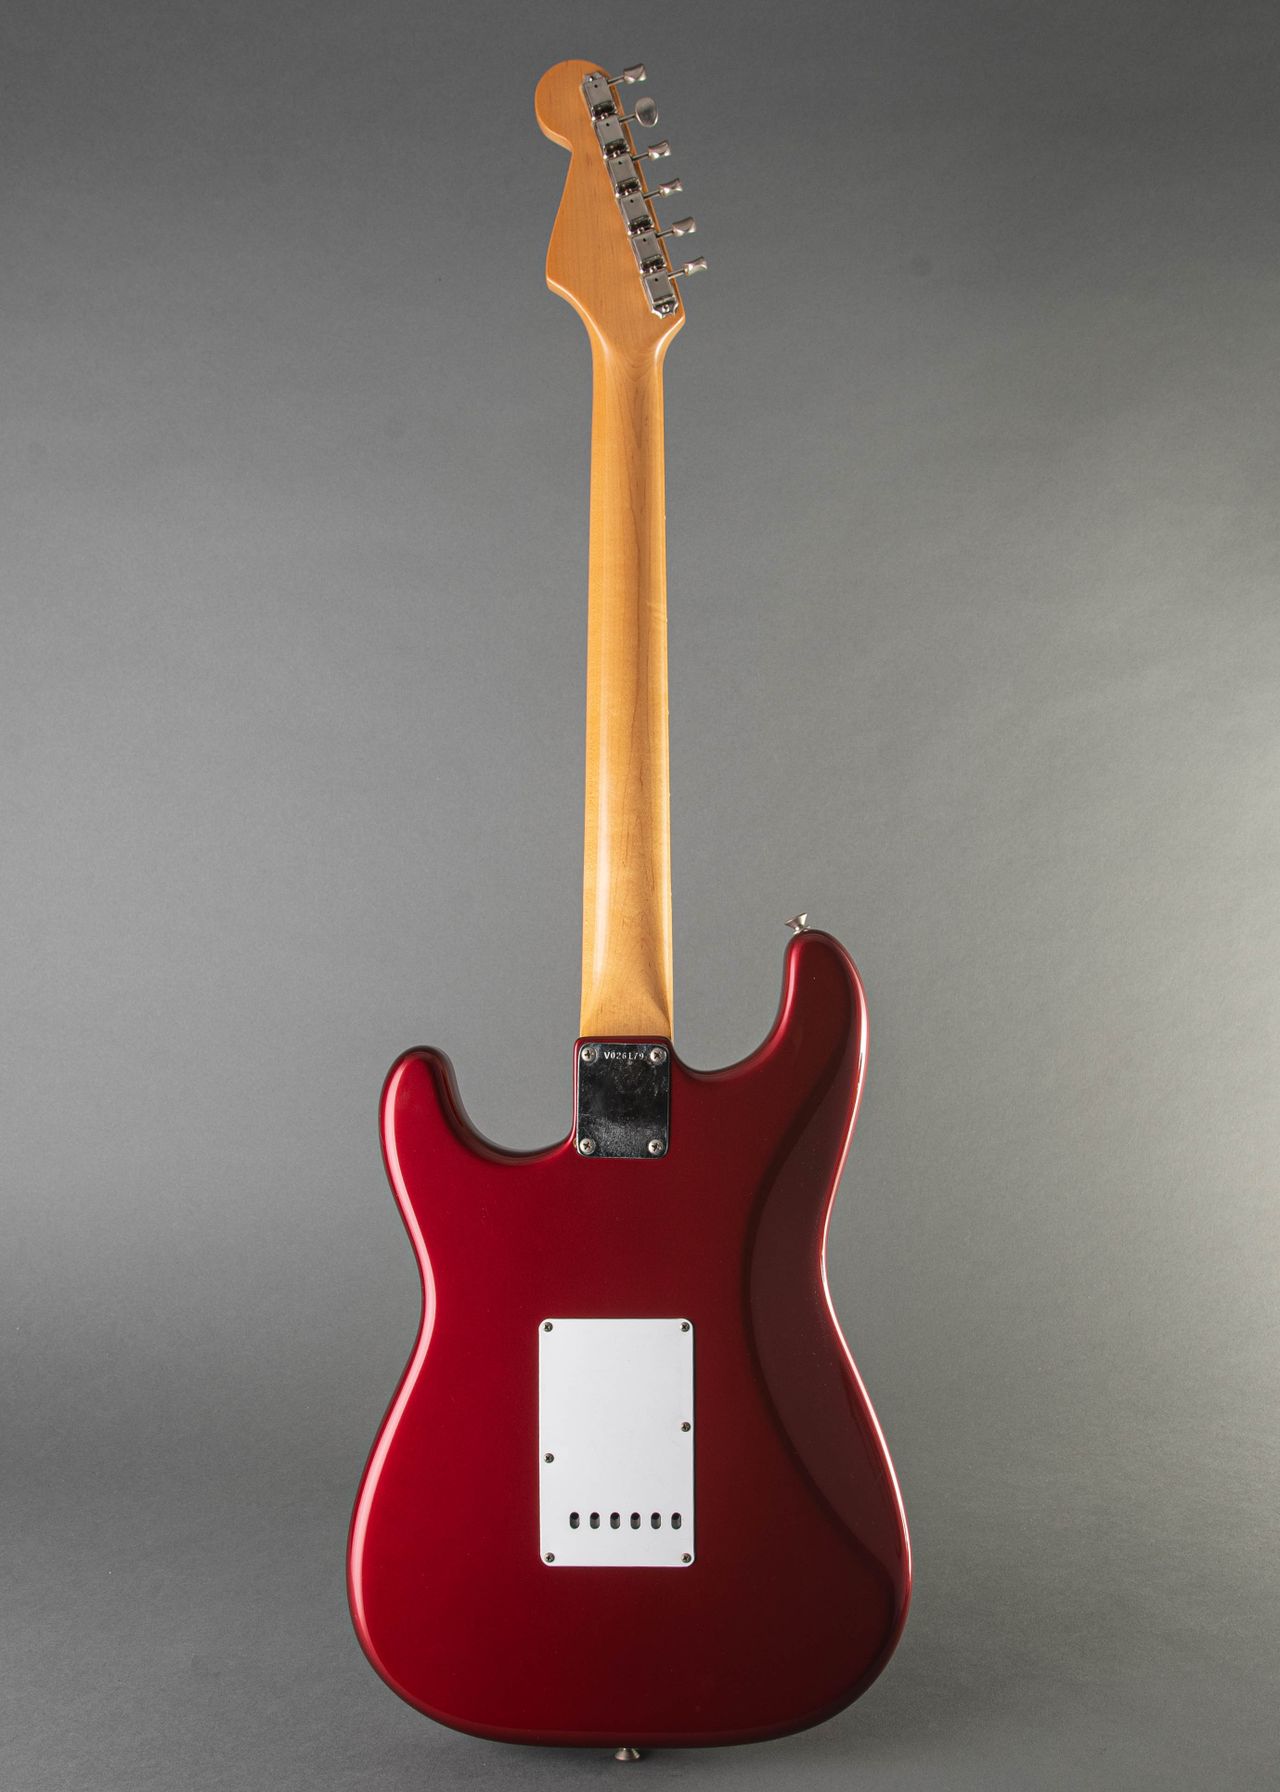 Sold - Fender Original 60s Stratocaster - Candy Apple Red - AVRI - American  Vintage - Open to Offers… - Guitars For Sale - Guitarchat